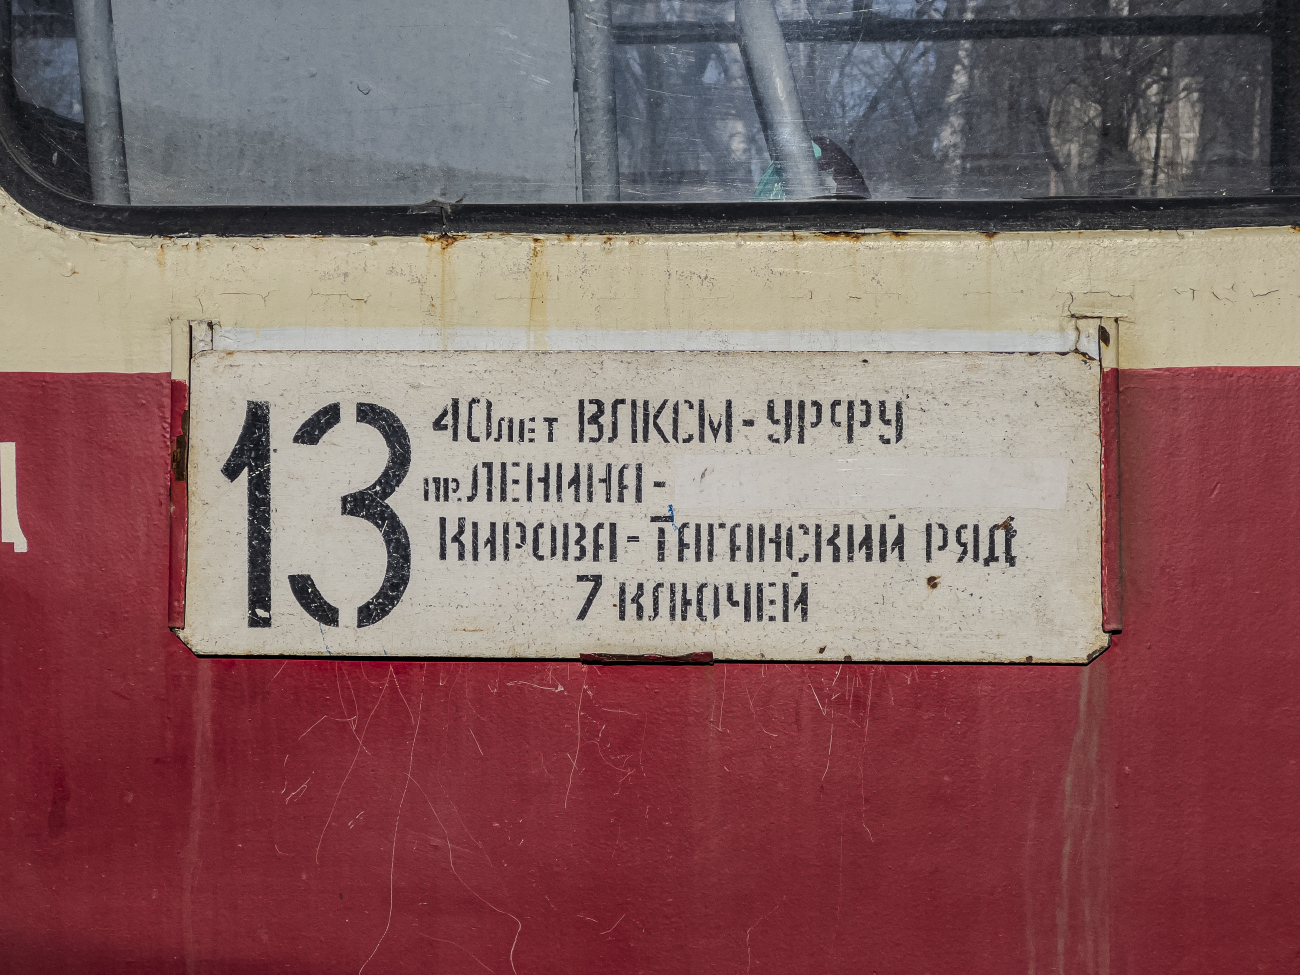 Yekaterinburg — Stopping and routing cliches